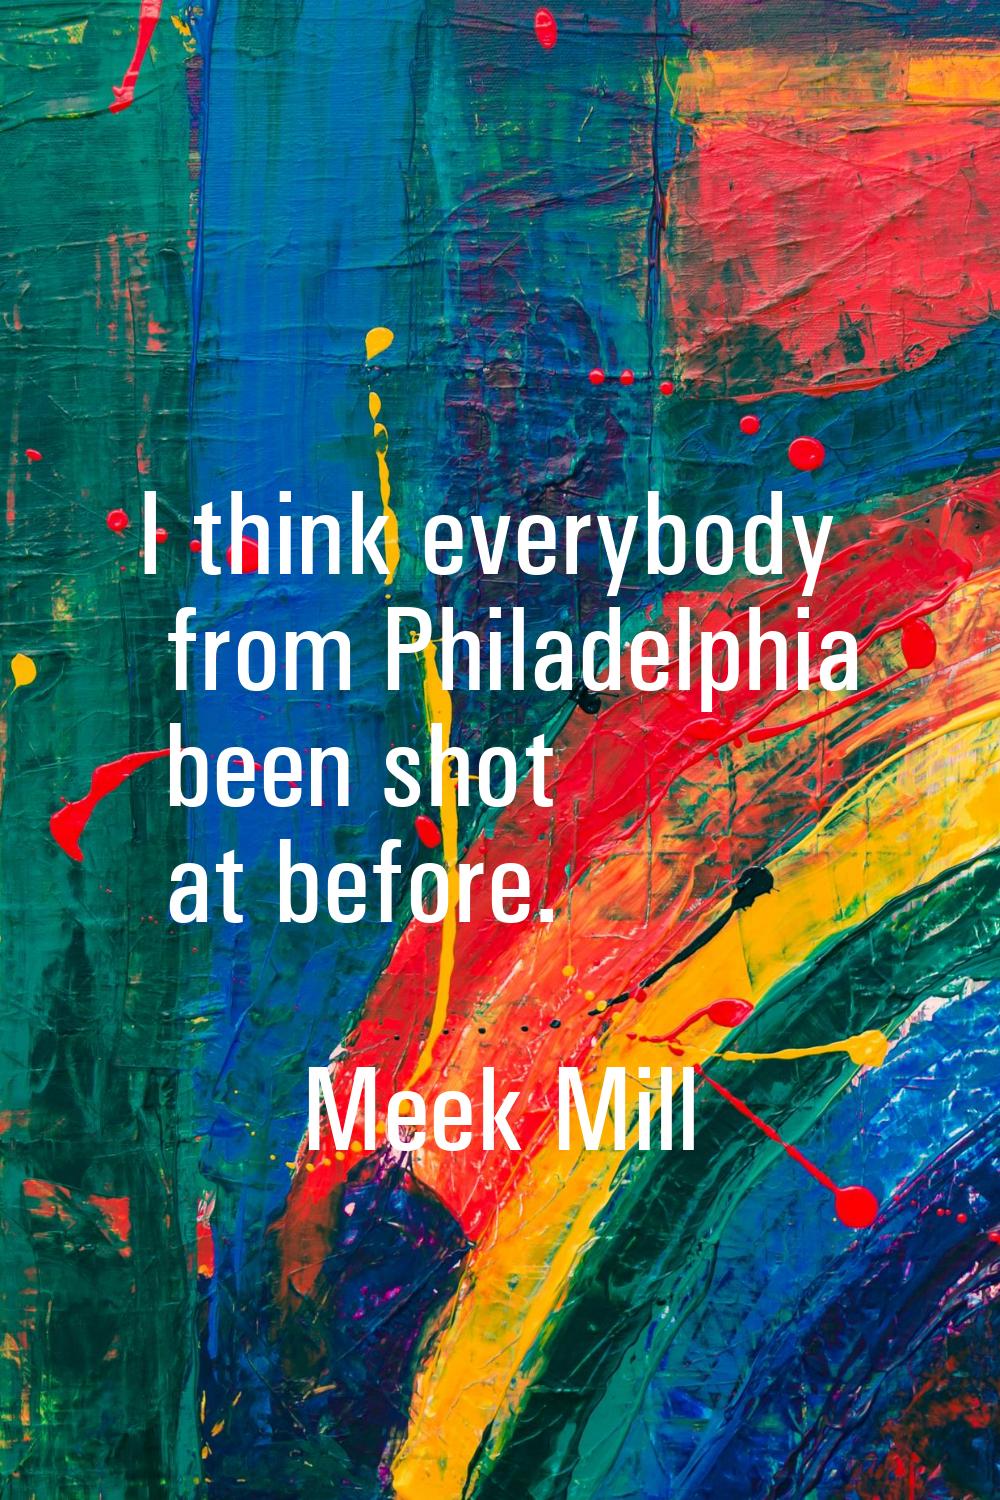 I think everybody from Philadelphia been shot at before.